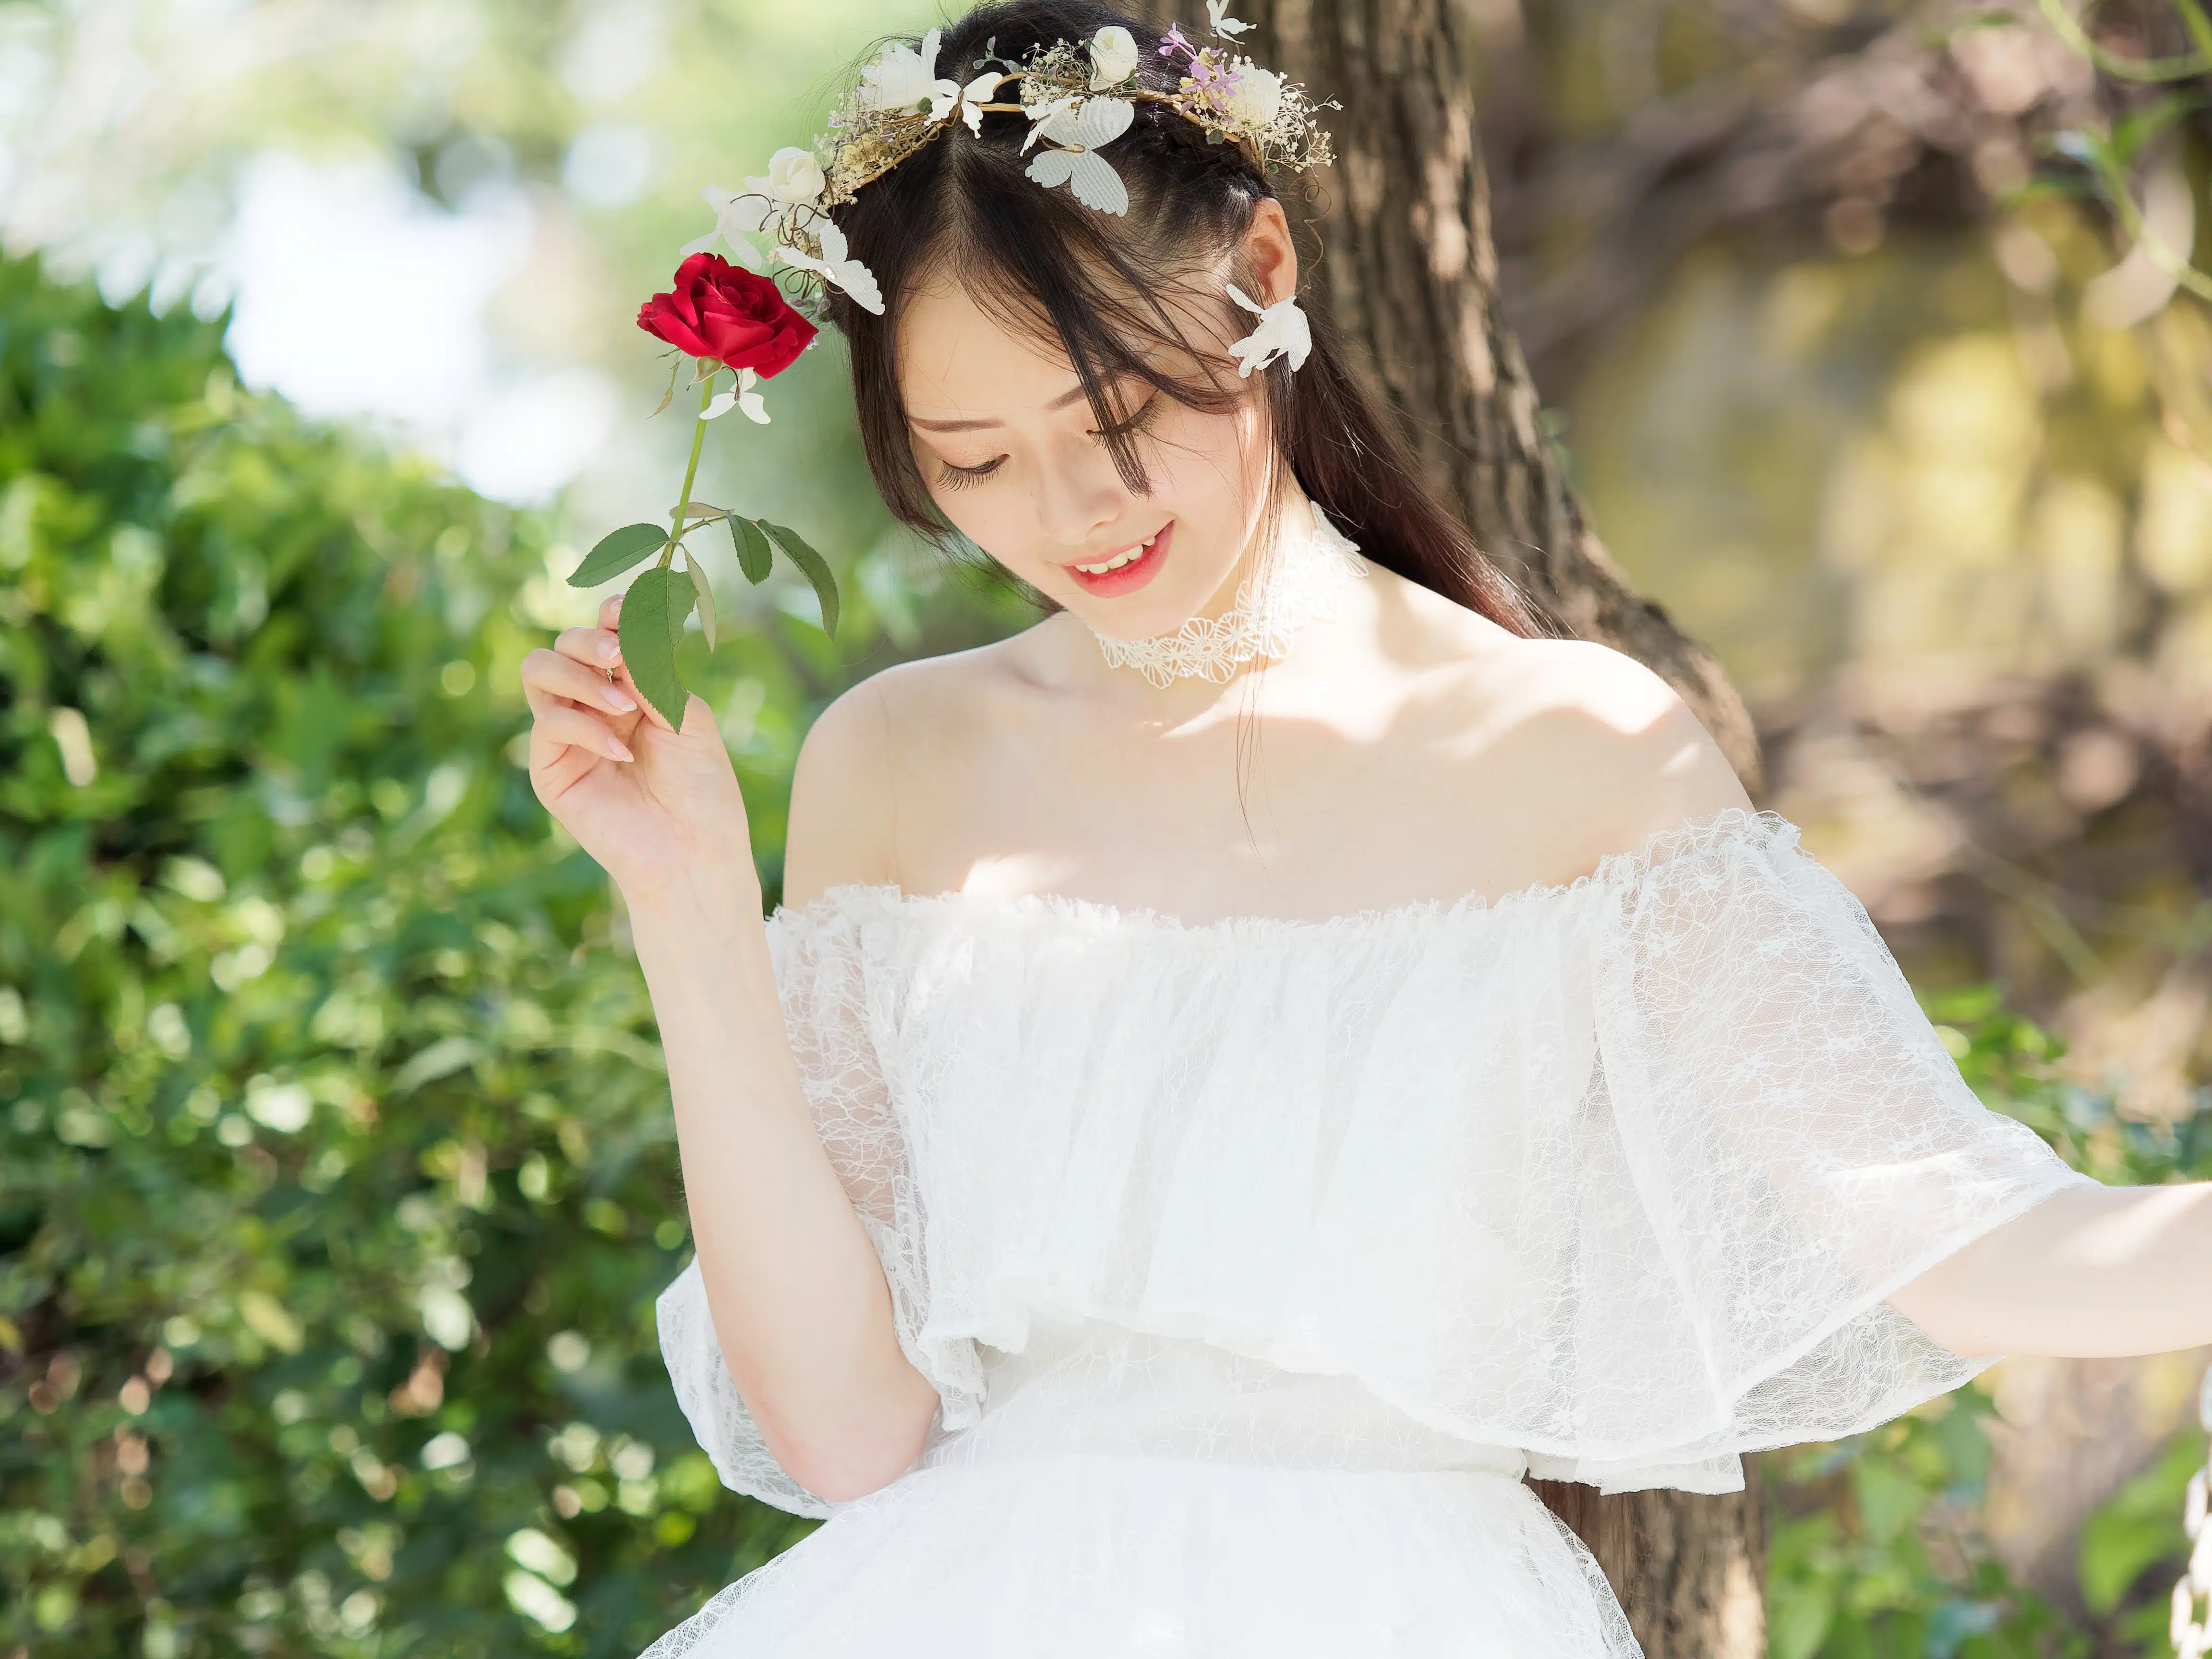 Beautiful fairy lady in a beautiful white dress and white flower head wreath, a red rose in her hand